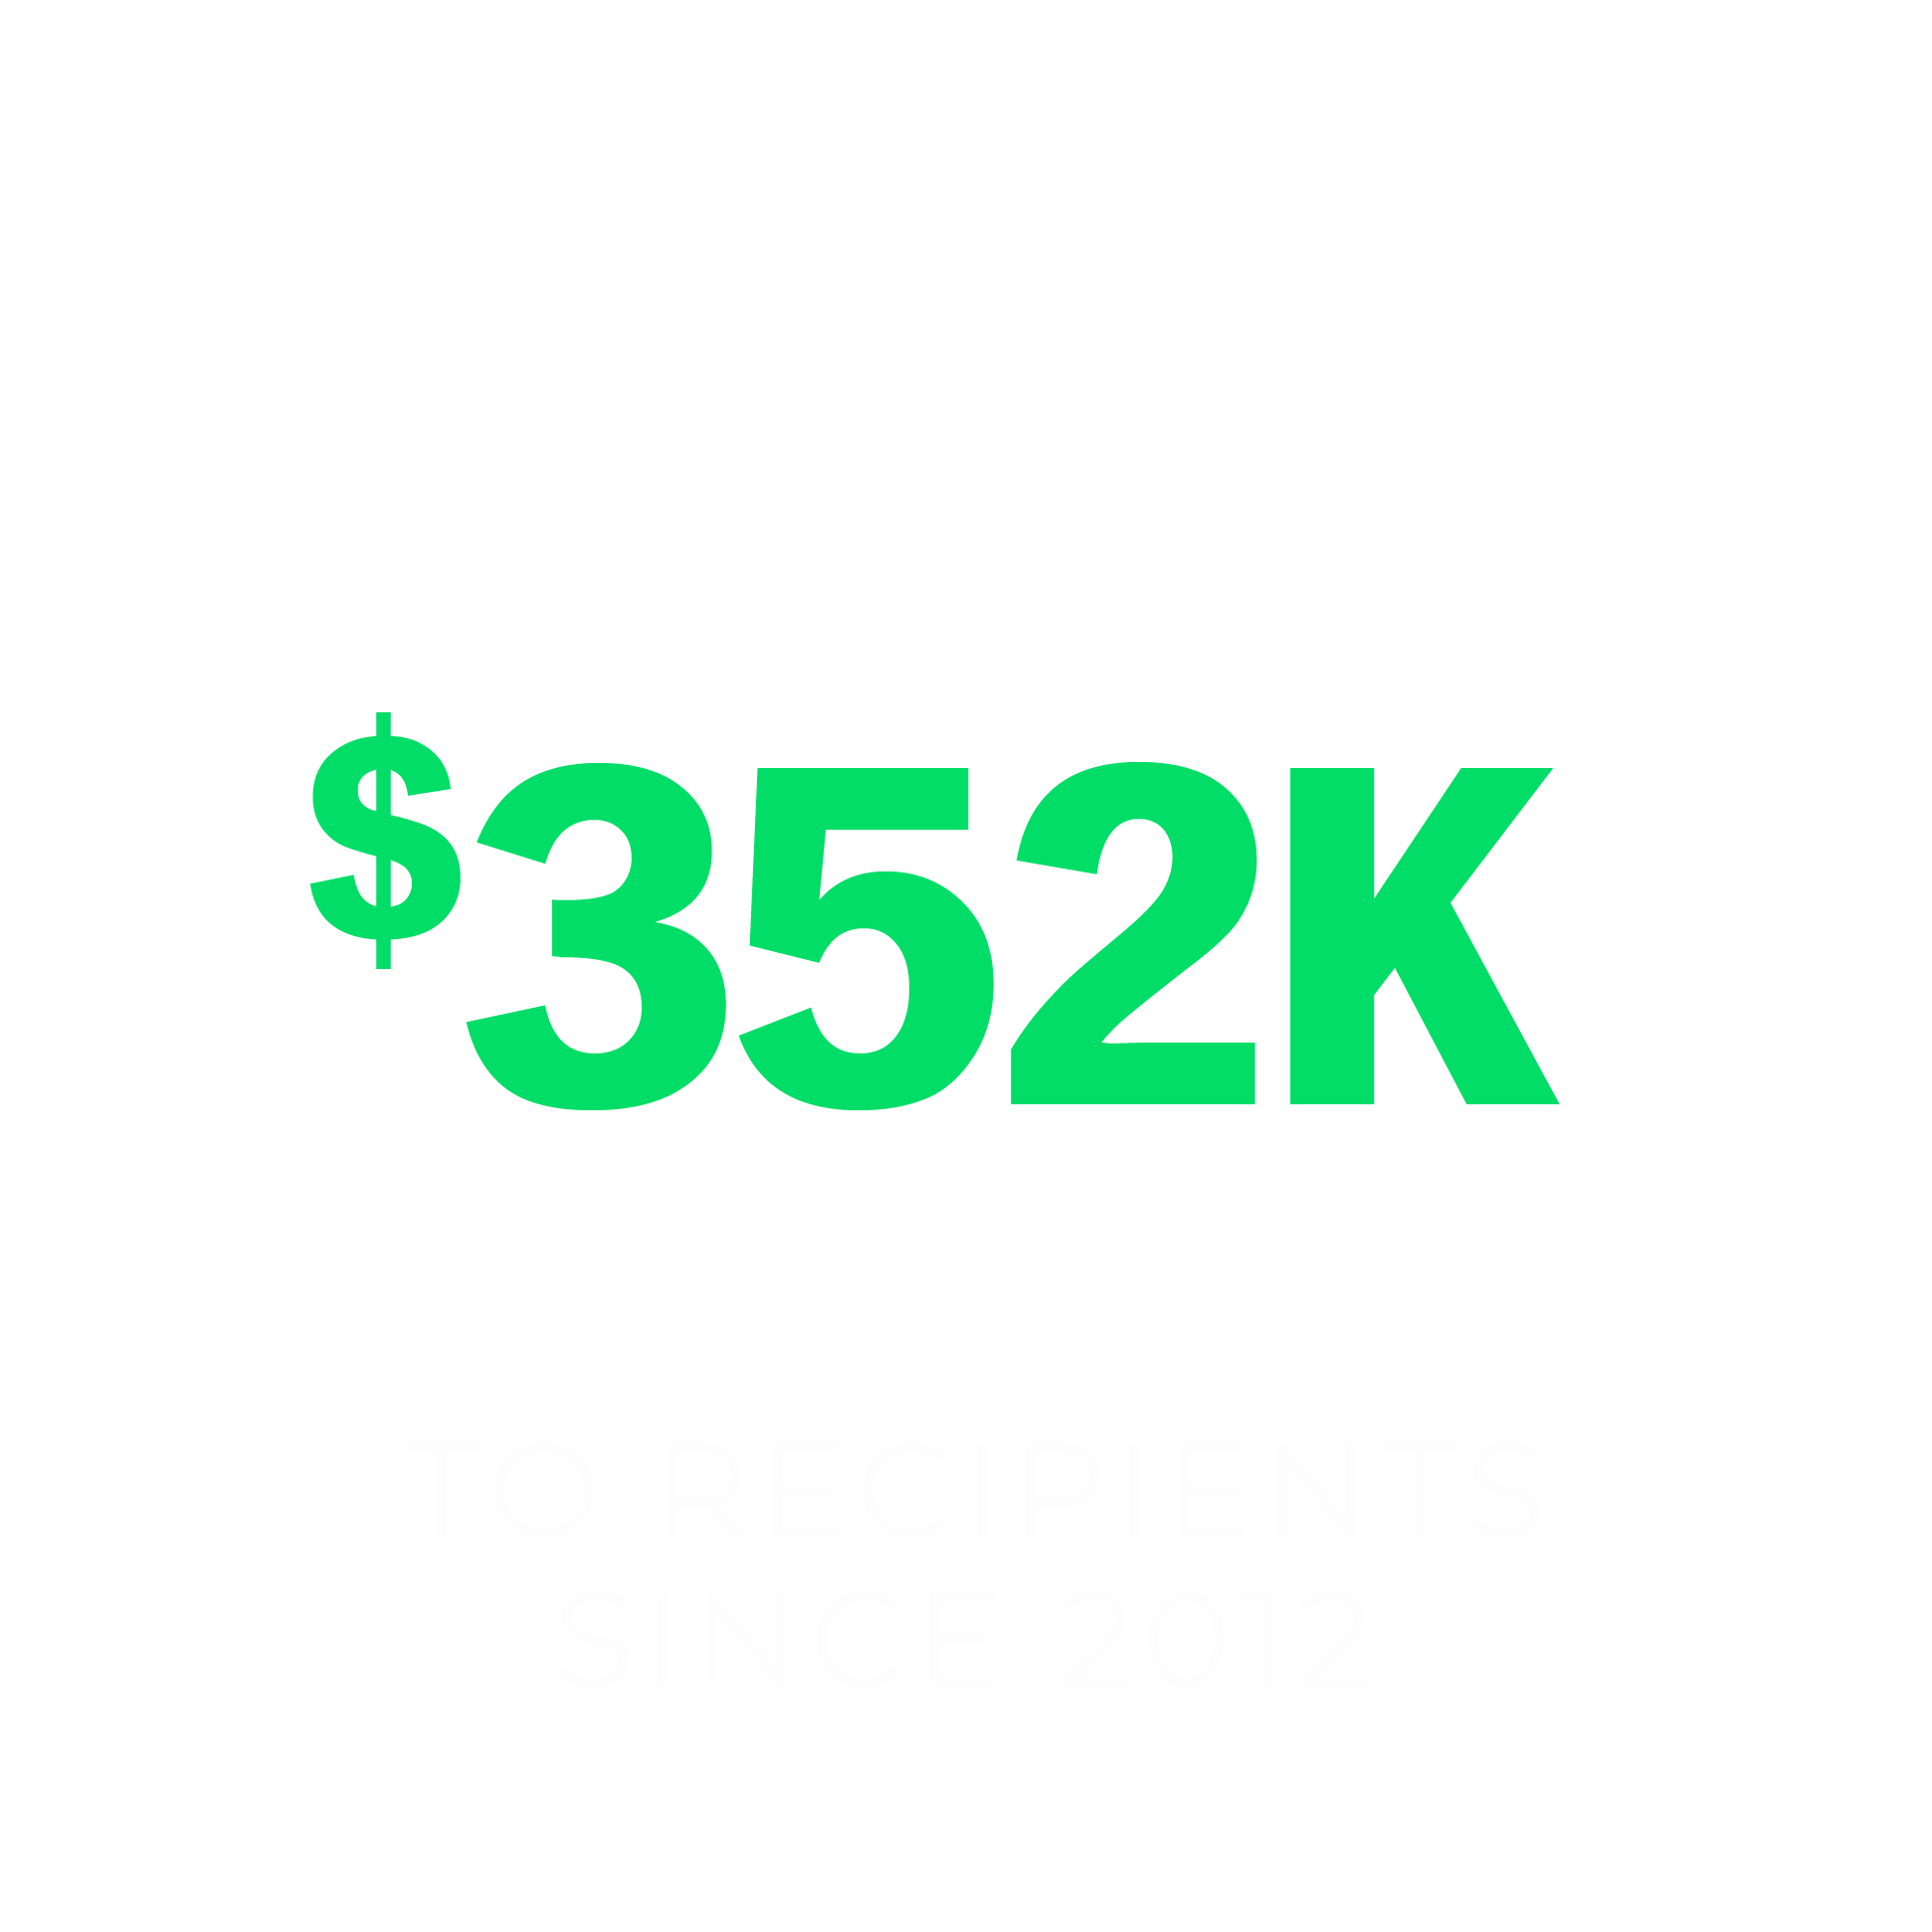 Awarded More Than $352,000 To Repcipients Since 2012